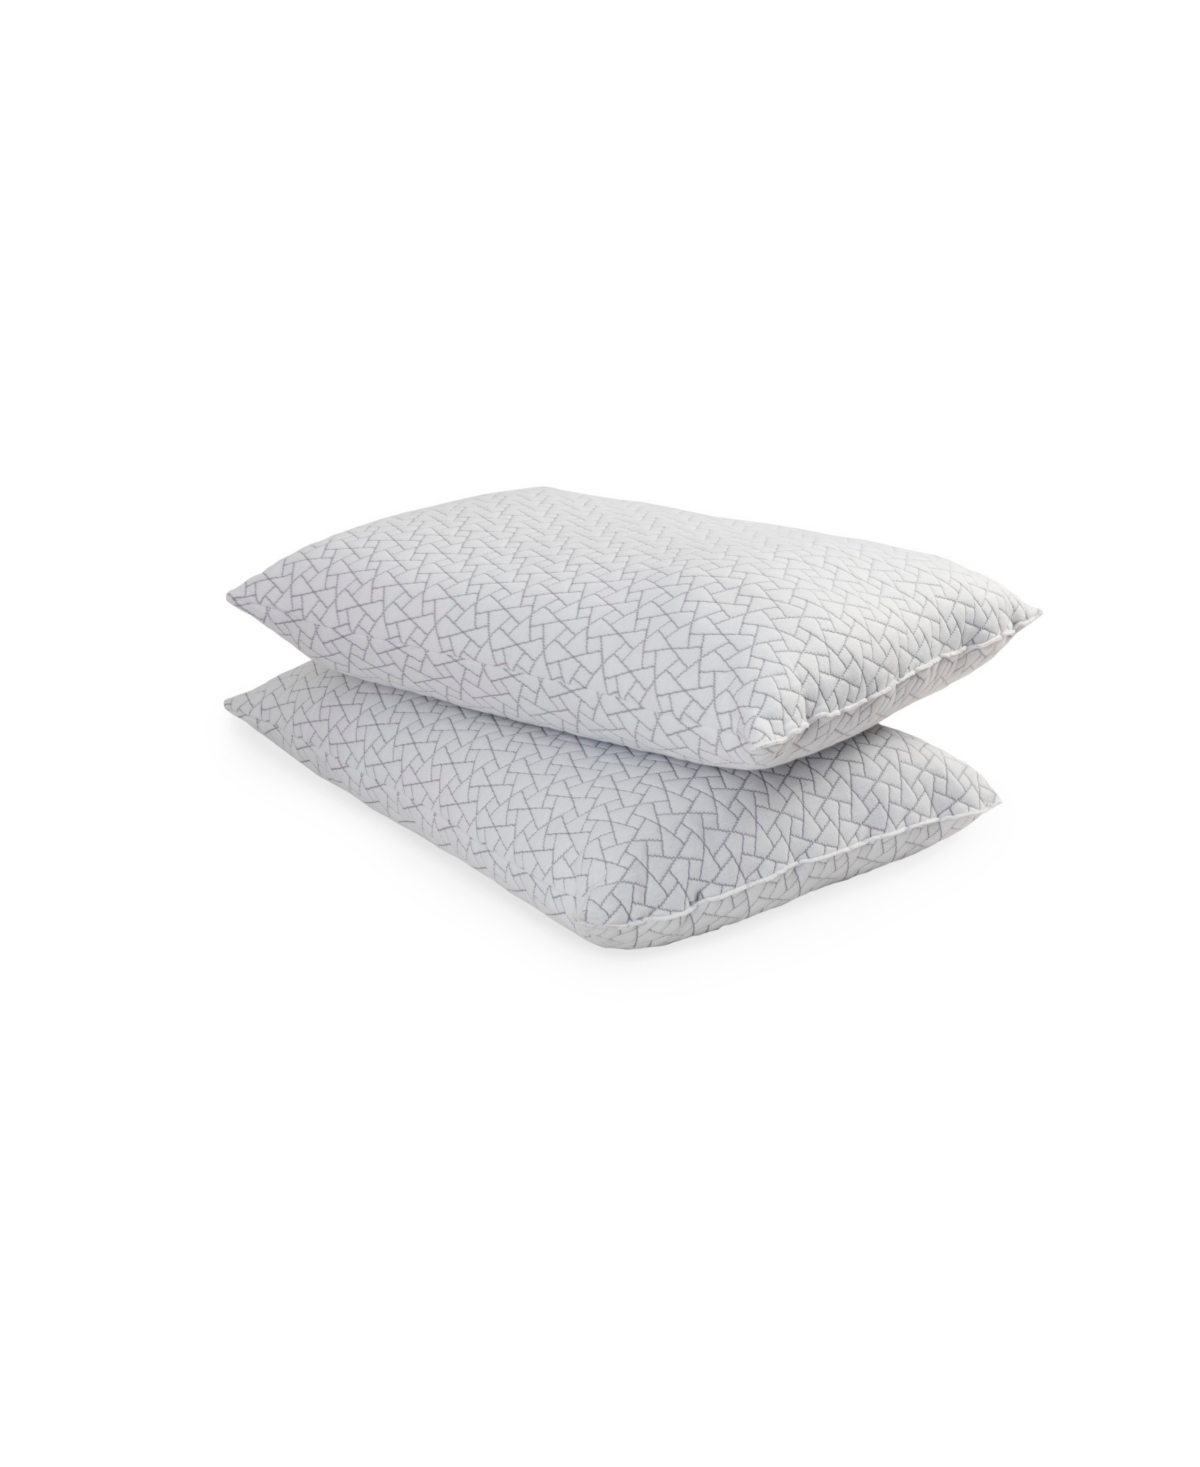 CANON PACK OF 2 CHARCOAL KNIT MICROFIBER PILLOW, KING